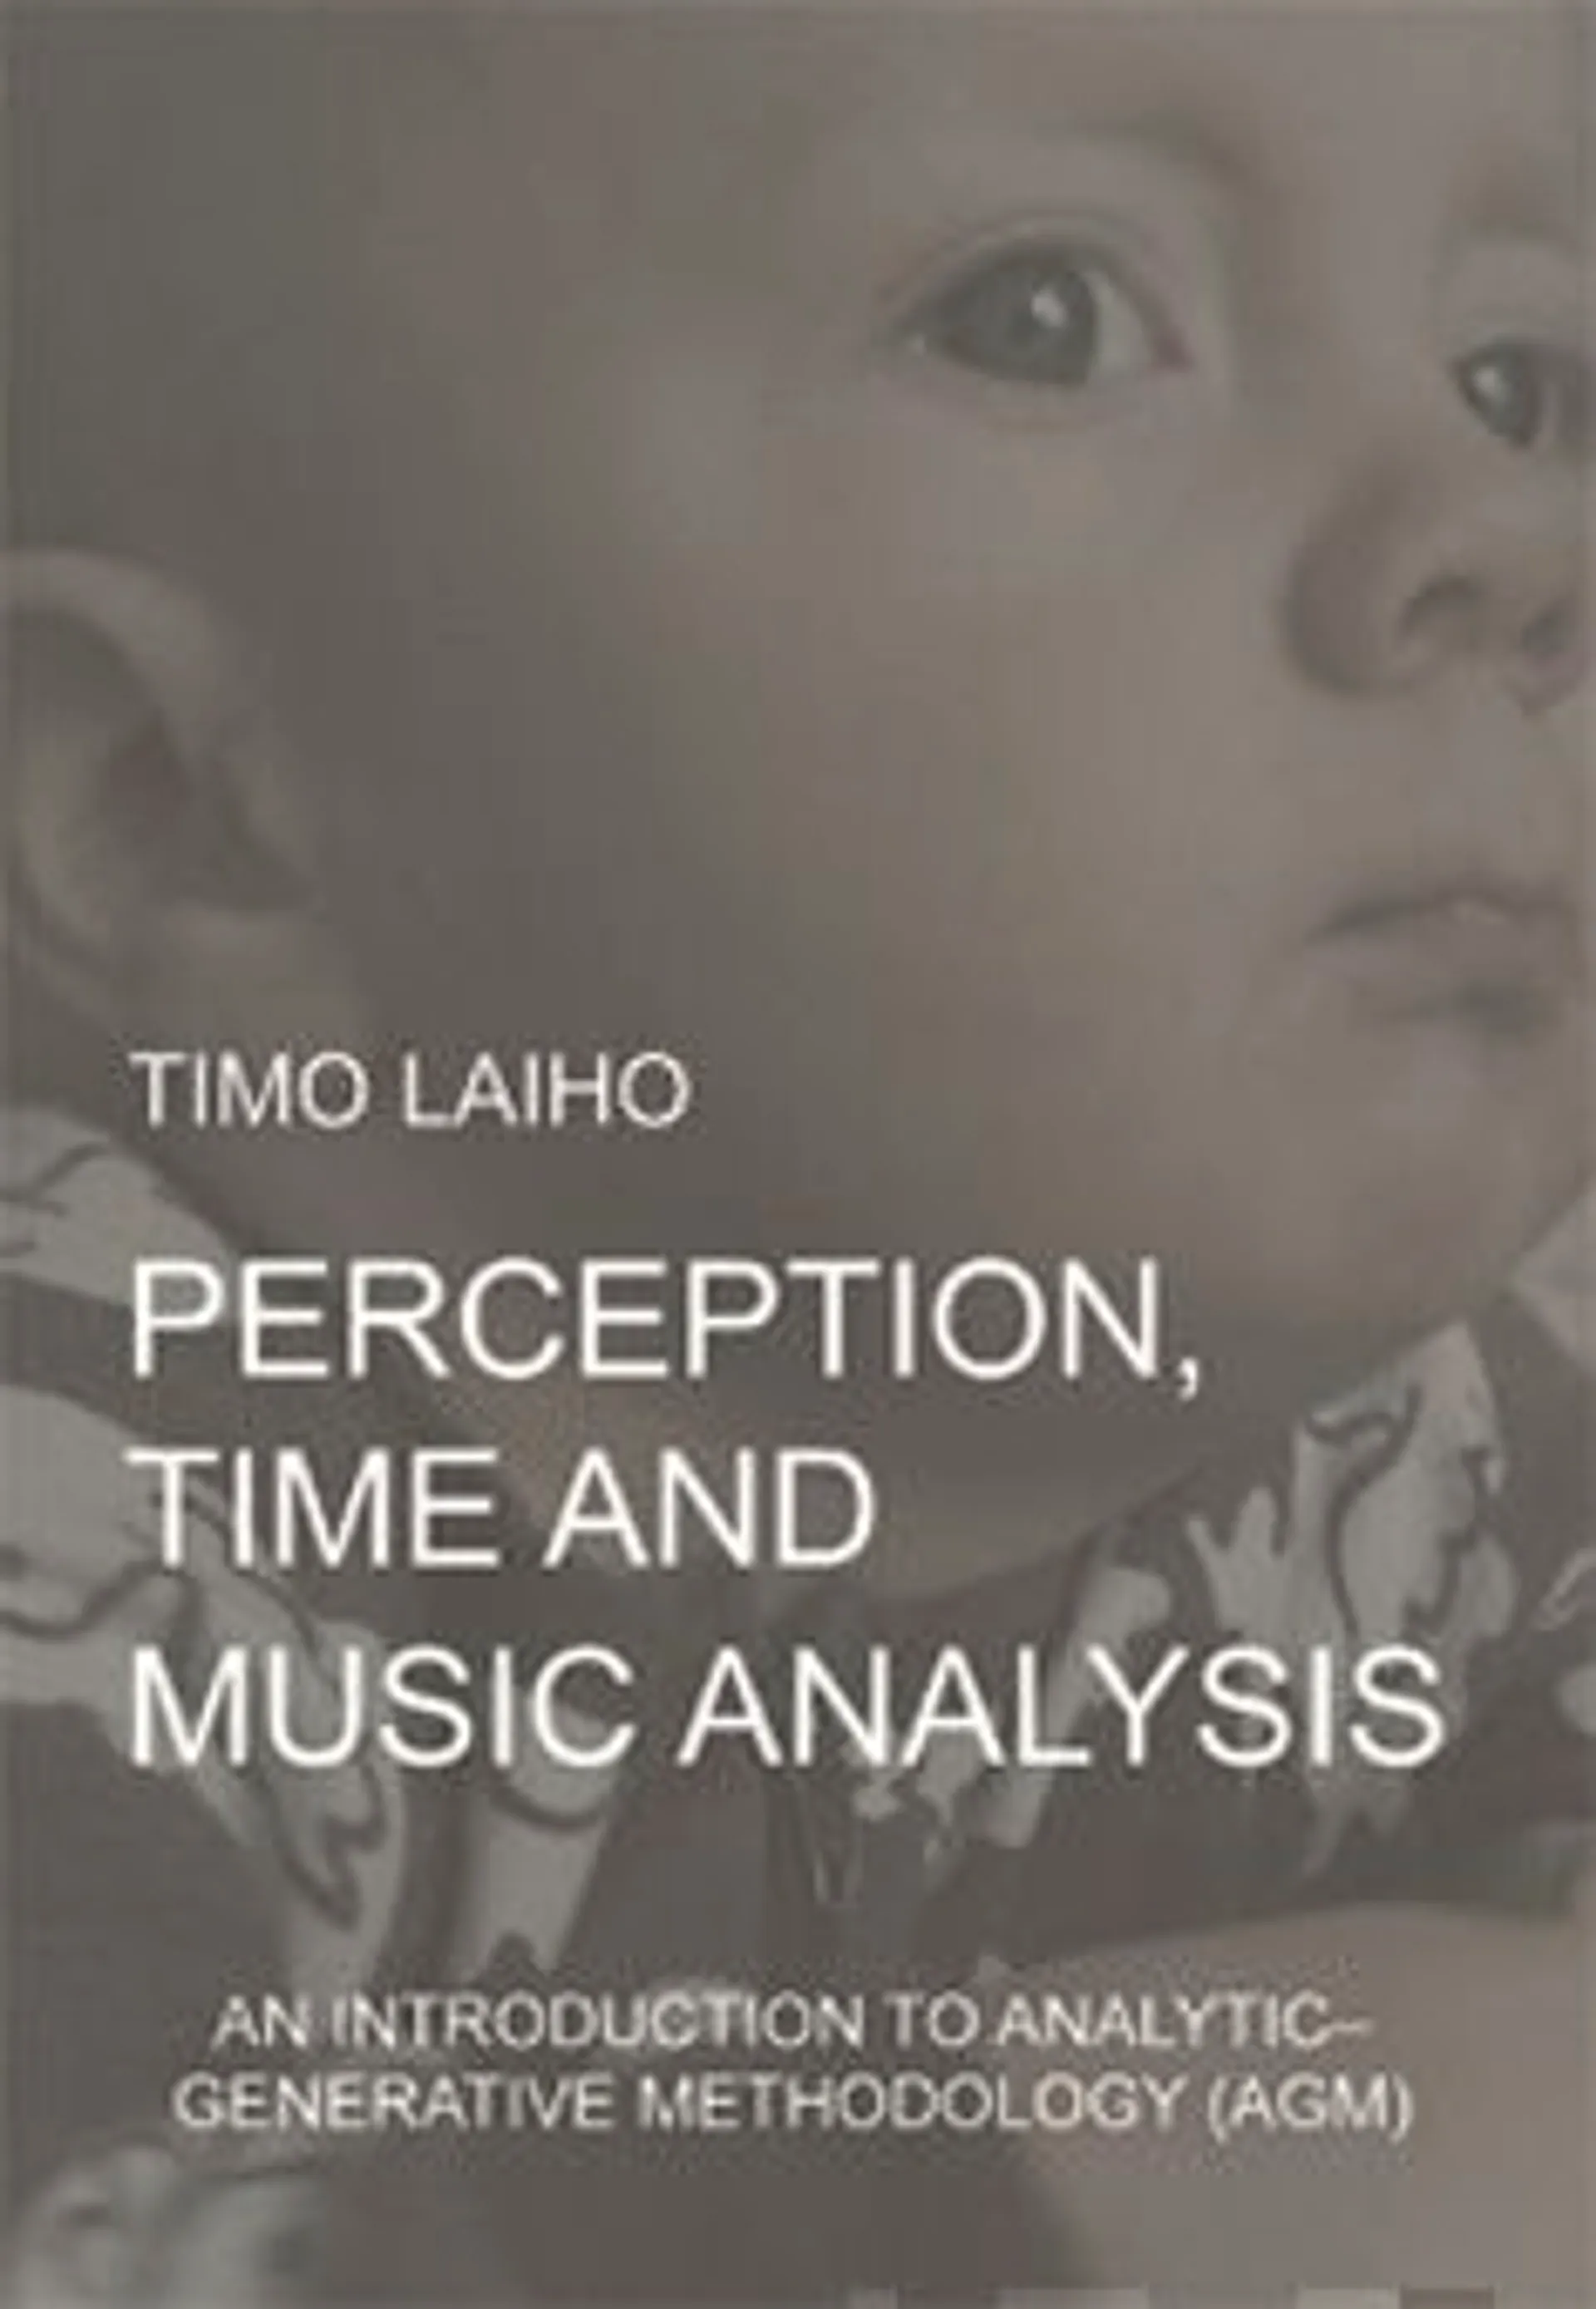 Laiho, Perception, Time and Music Analysis